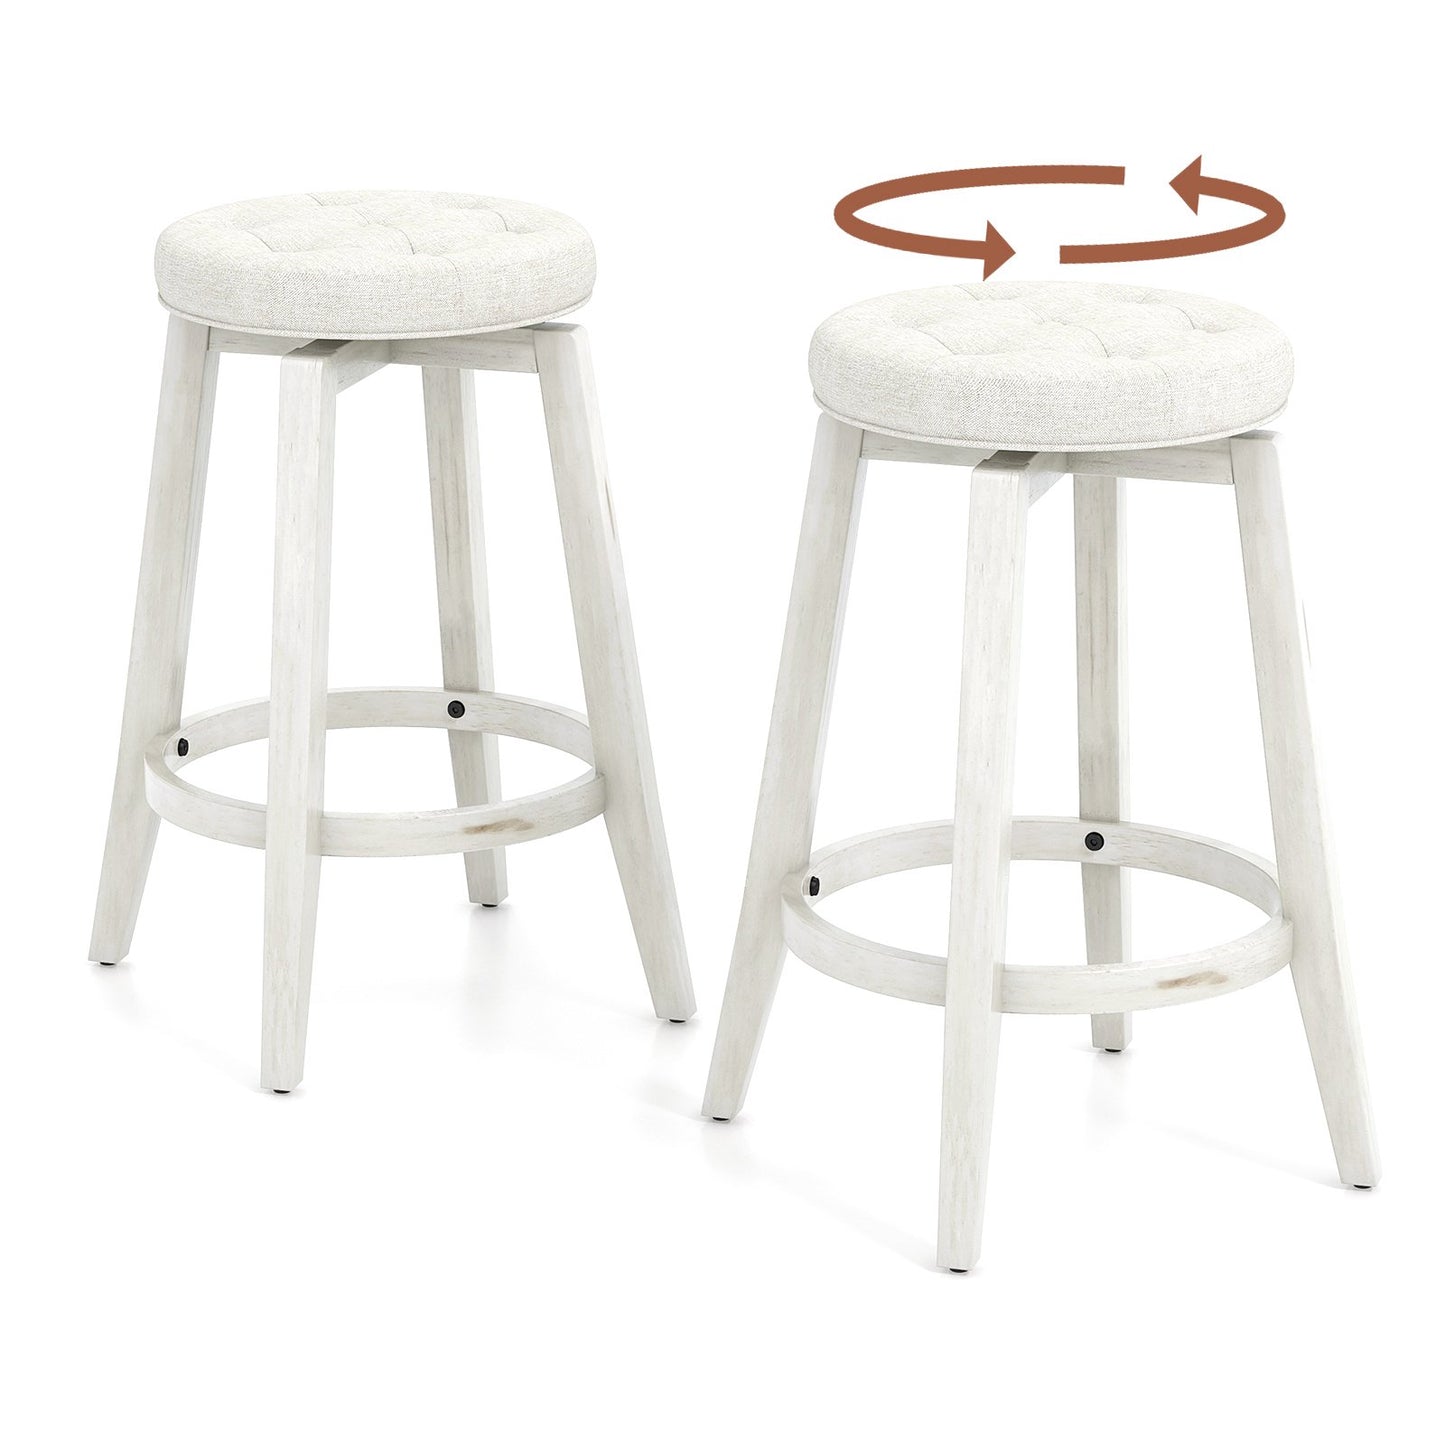 360° Swivel Upholstered Rubberwood Frame Bar Stool Set of 2 with Footrest-24 inches, White